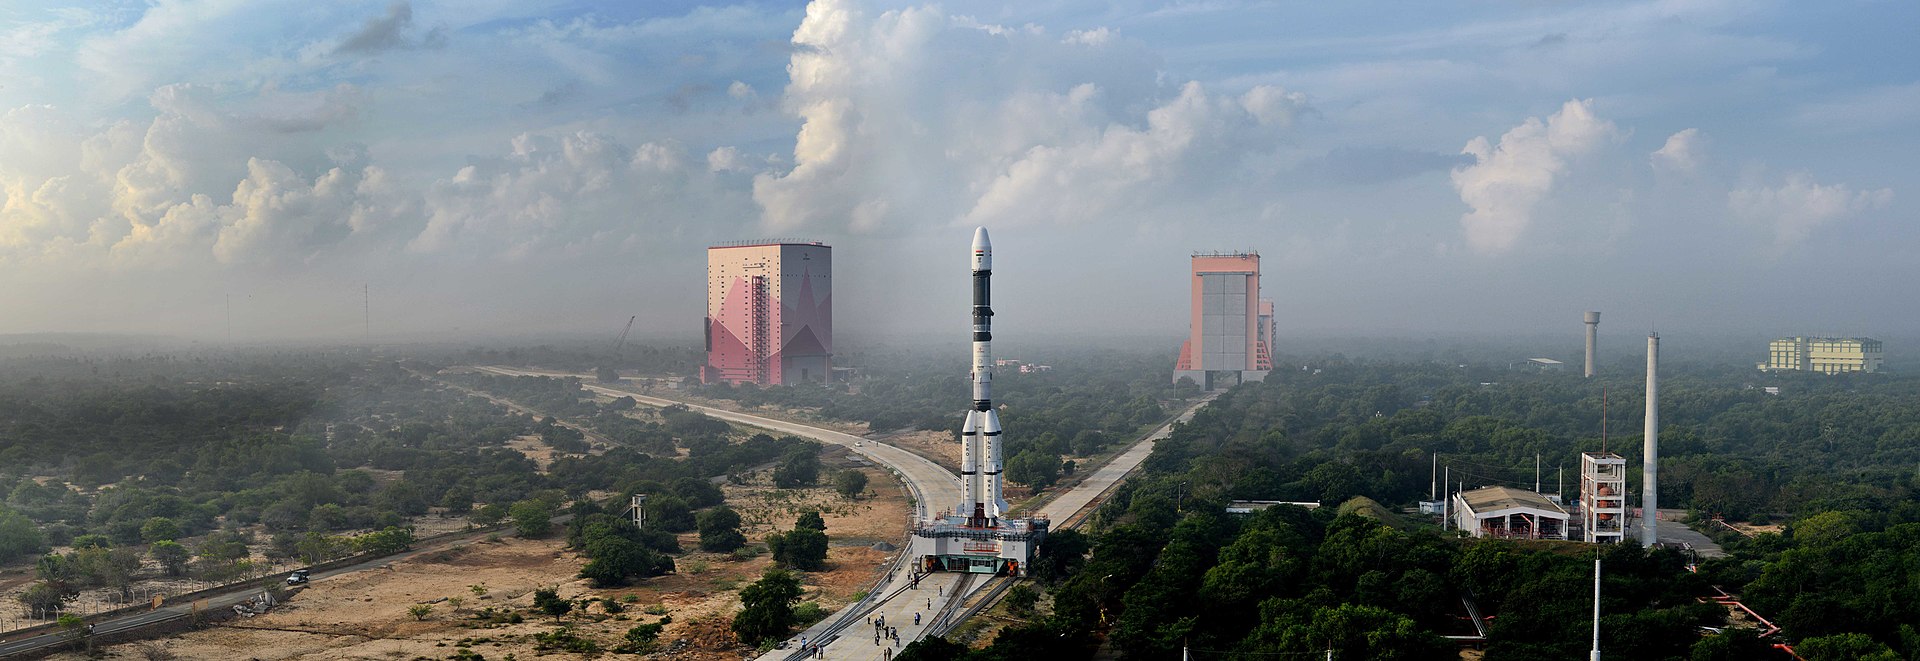 Autorstwa Indian Space Research Organisation (GODL-India), GODL-India, https://commons.wikimedia.org/w/index.php?curid=75154125